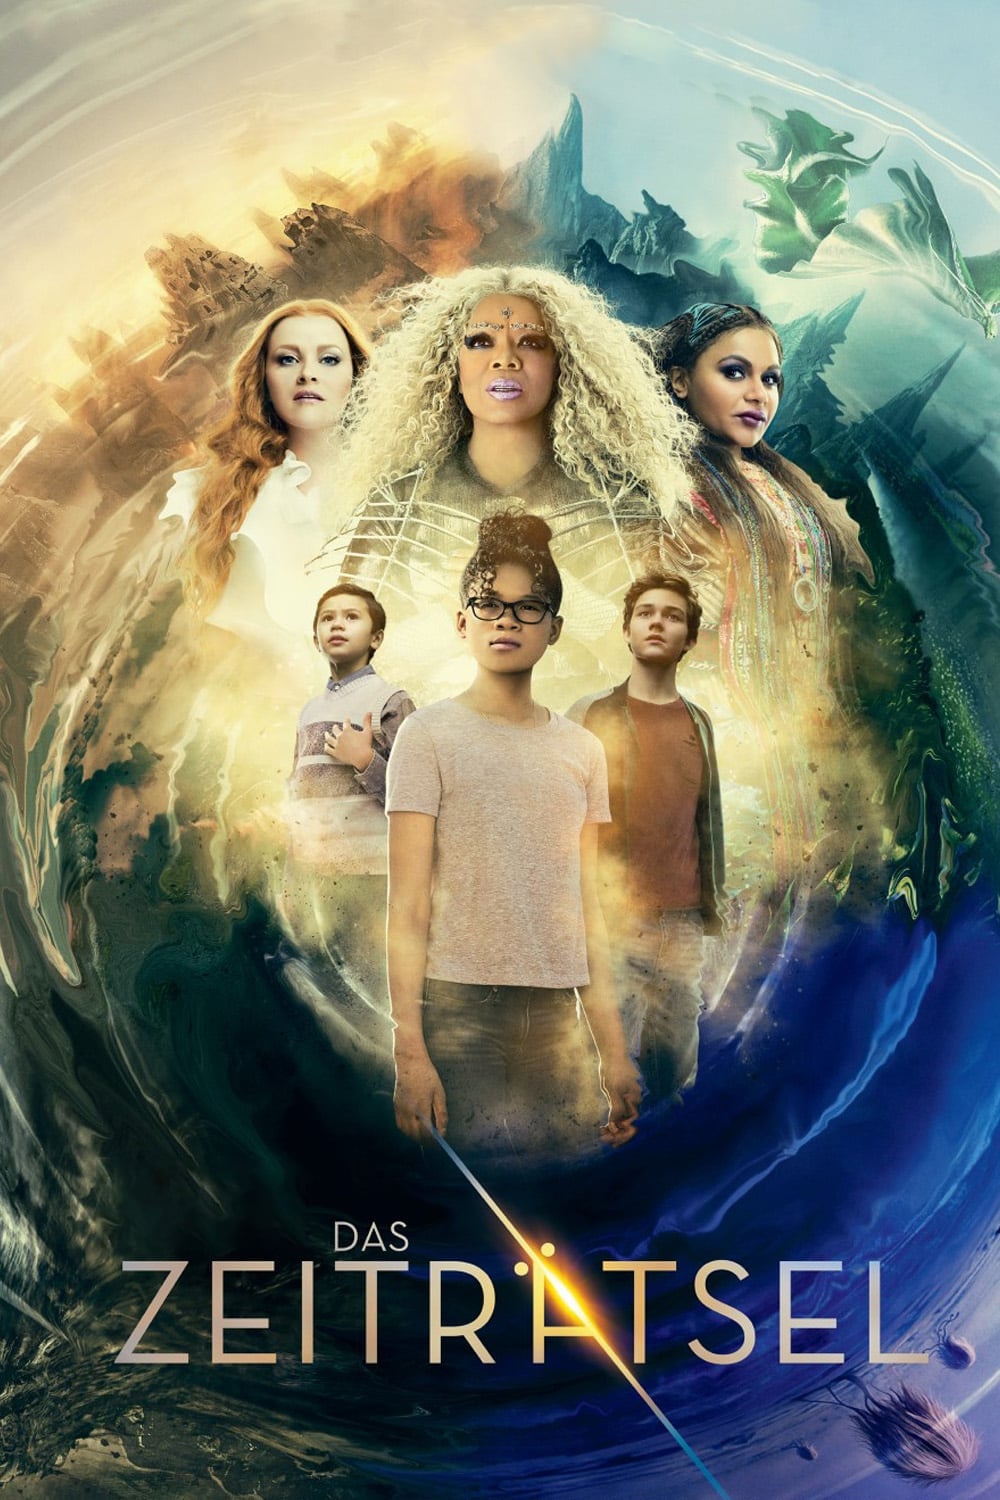 A Wrinkle in Time (2018)